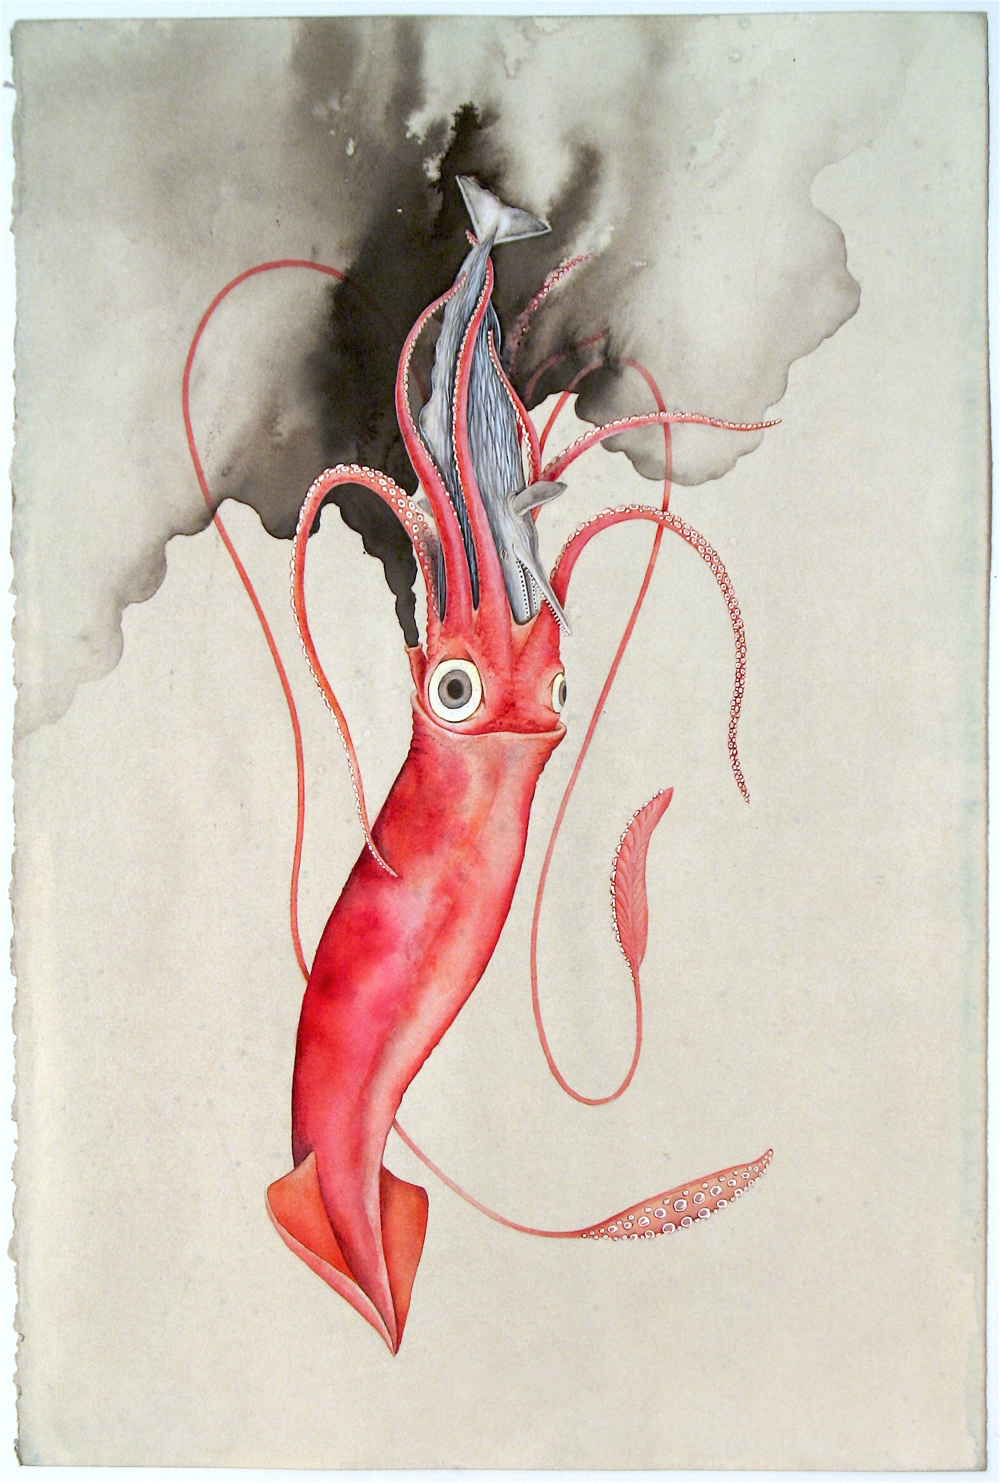 Justin Gibbens, The Squid and the Whale, 2017, watercolor, ink on paper, 23 x 15 inches, $1800.